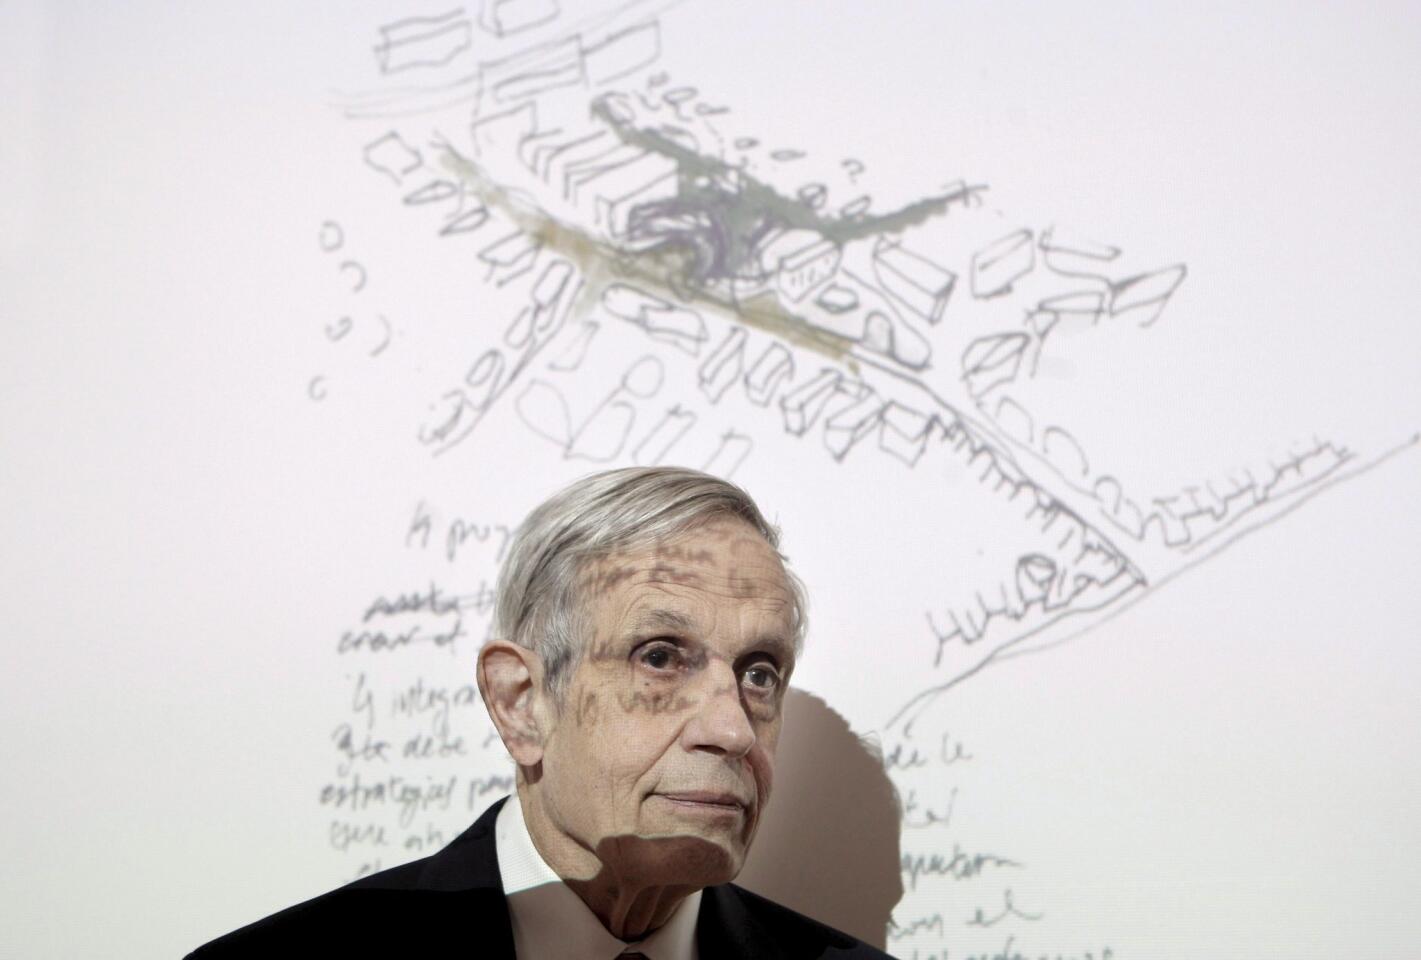 Nobel Laureate John Nash, shown in 2008, was the inspiration for Ron Howard’s Oscar-winning film “A Beautiful Mind,”